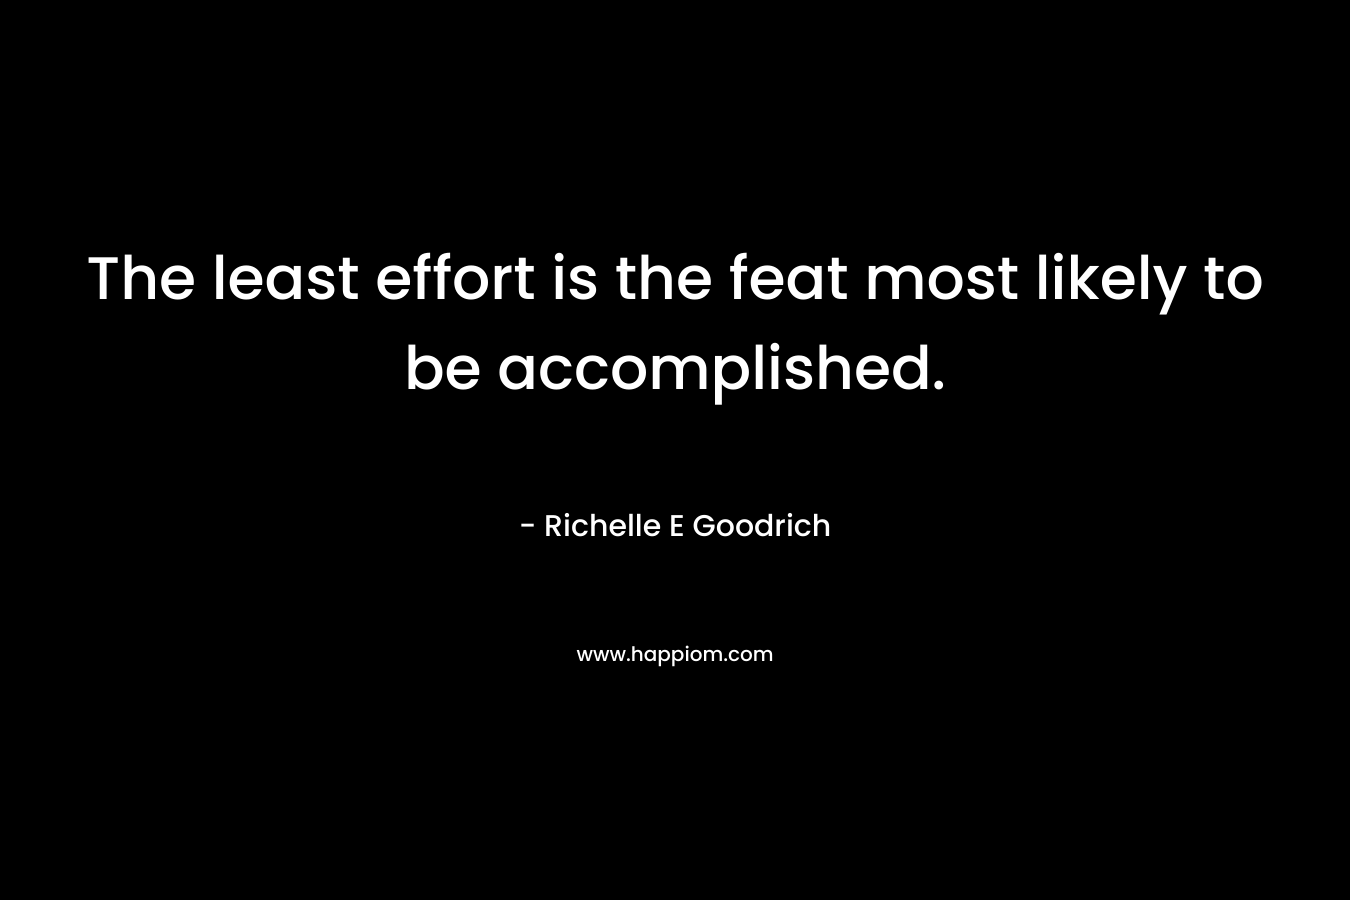 The least effort is the feat most likely to be accomplished. – Richelle E Goodrich